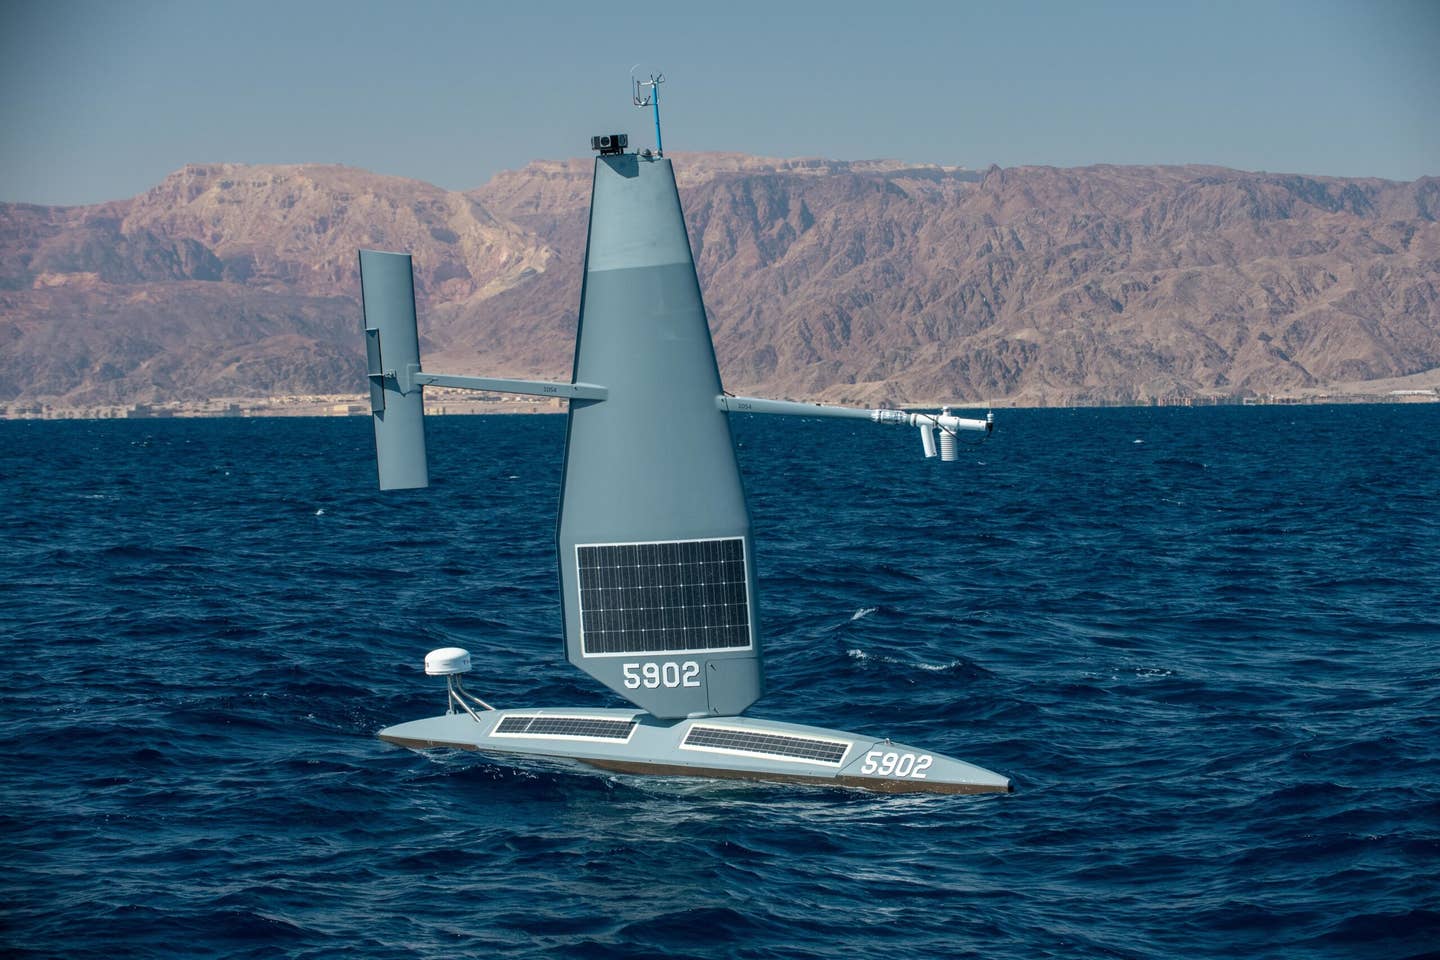 A Saildrone Explorer unmanned surface vessel sails in the Gulf of Aqaba during International Maritime Exercise/Cutlass Express 2022. <em>Credit: Mass Communication Specialist 2nd Class Dawson Roth/U.S. Navy</em>